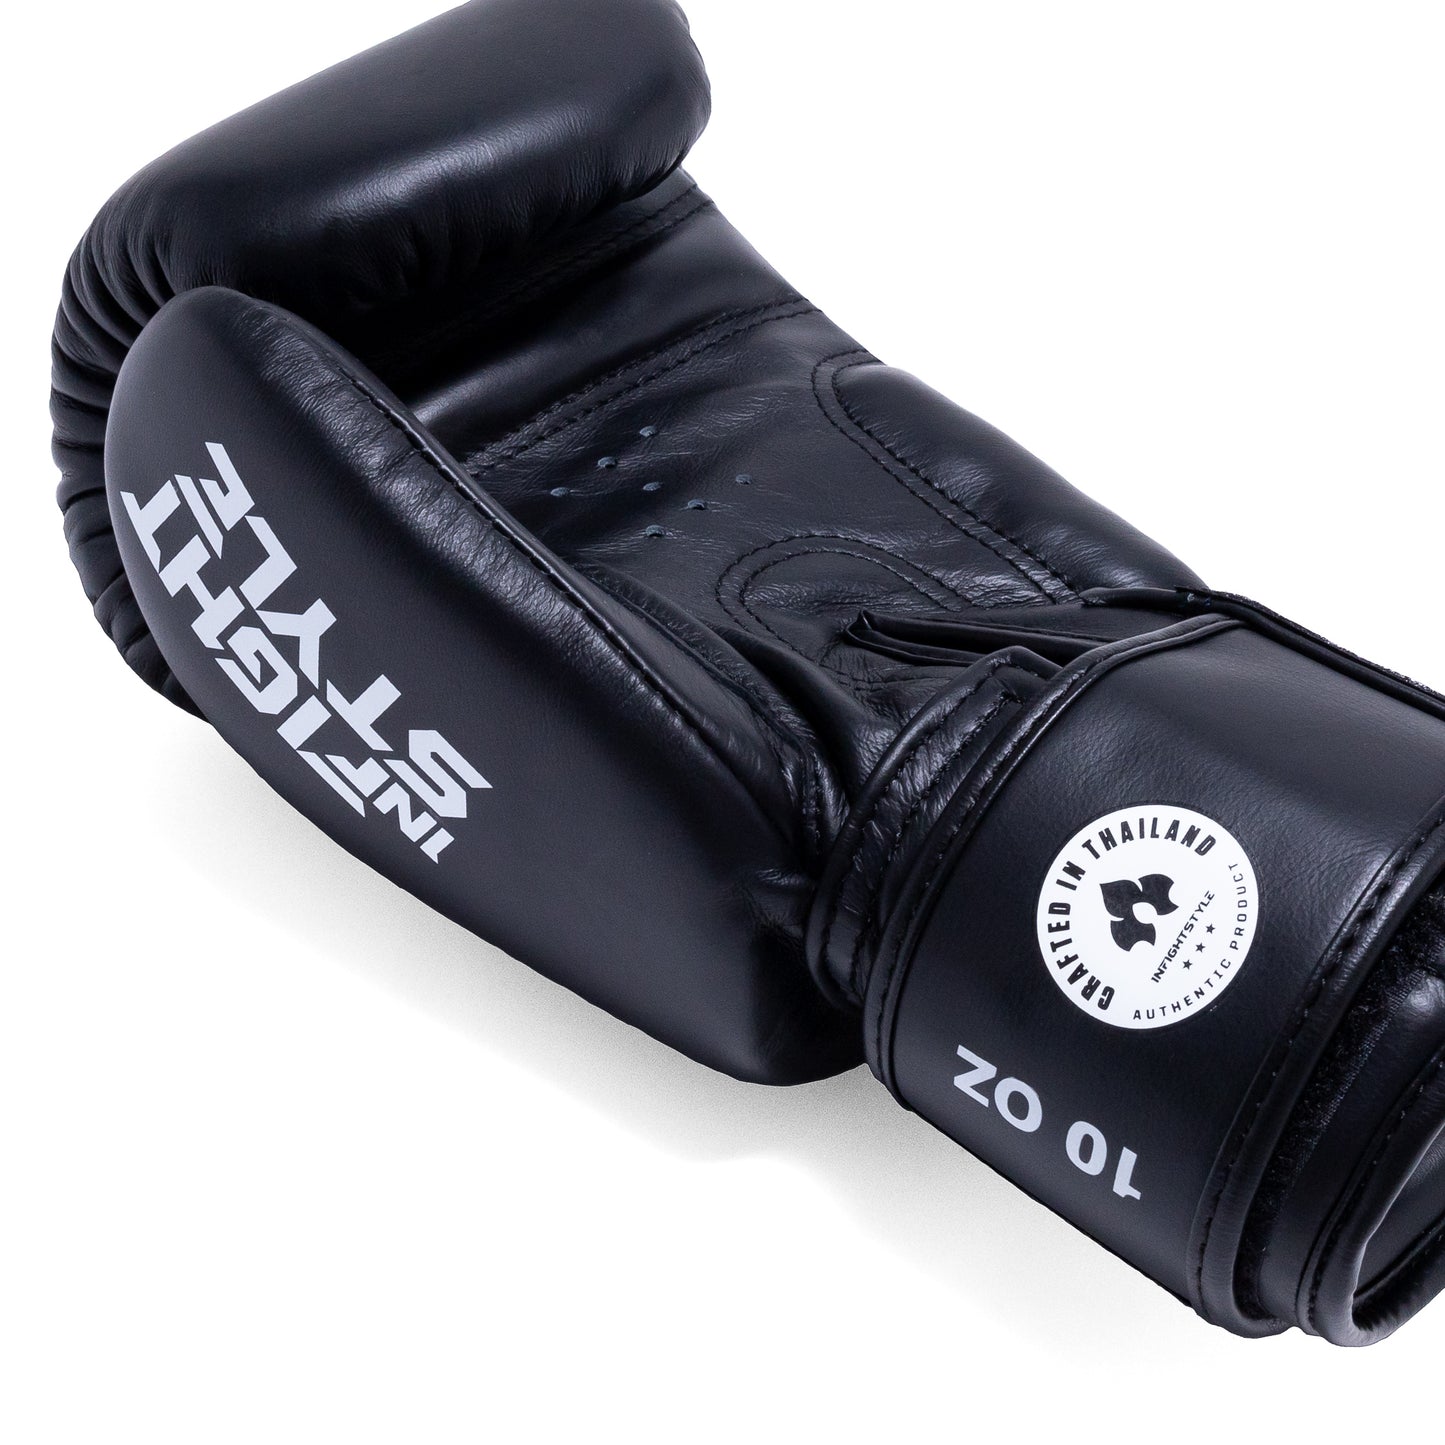 InfightStyle Muay Thai Boxing Pro Classic Leather Gloves - Black